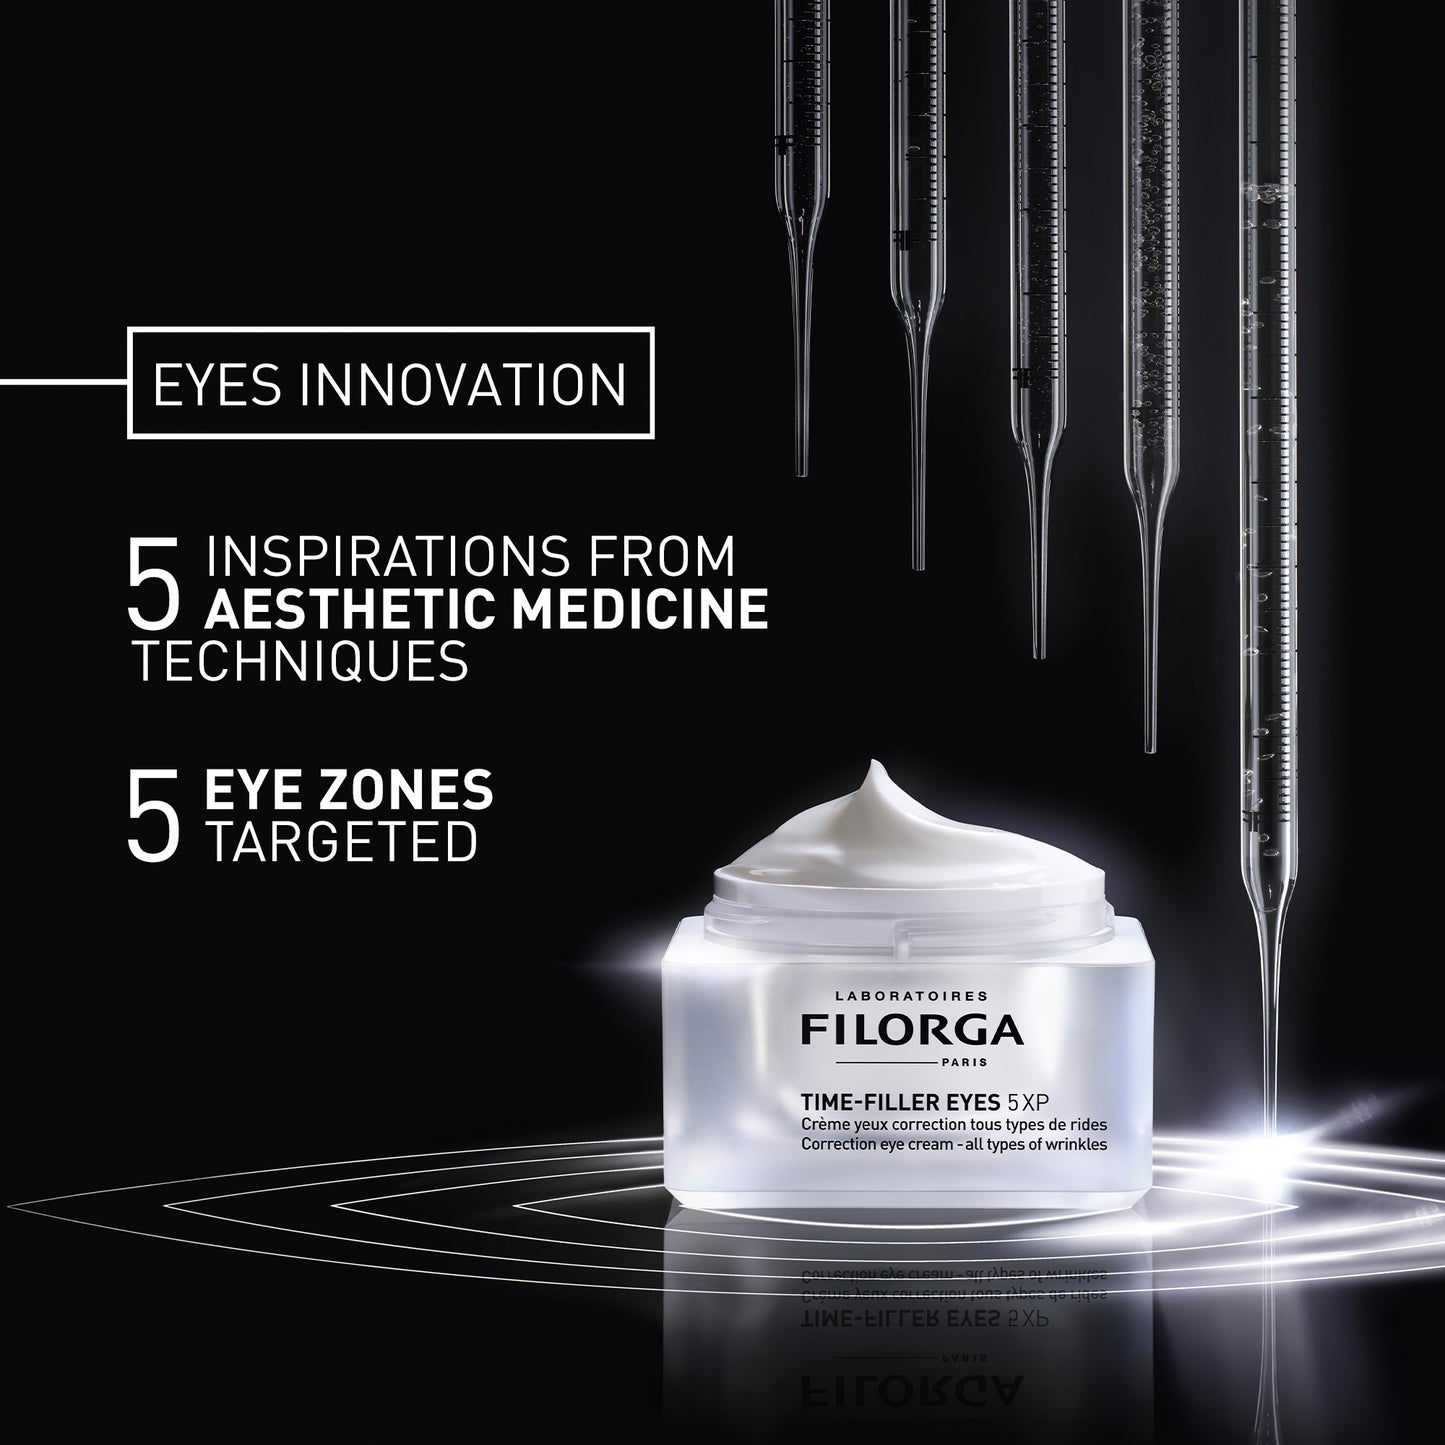 FILORGA TIME-FILLER EYES 5-XP Innovation 5 eye zones targeted and inspired by 5 aesthetic medicine techniques